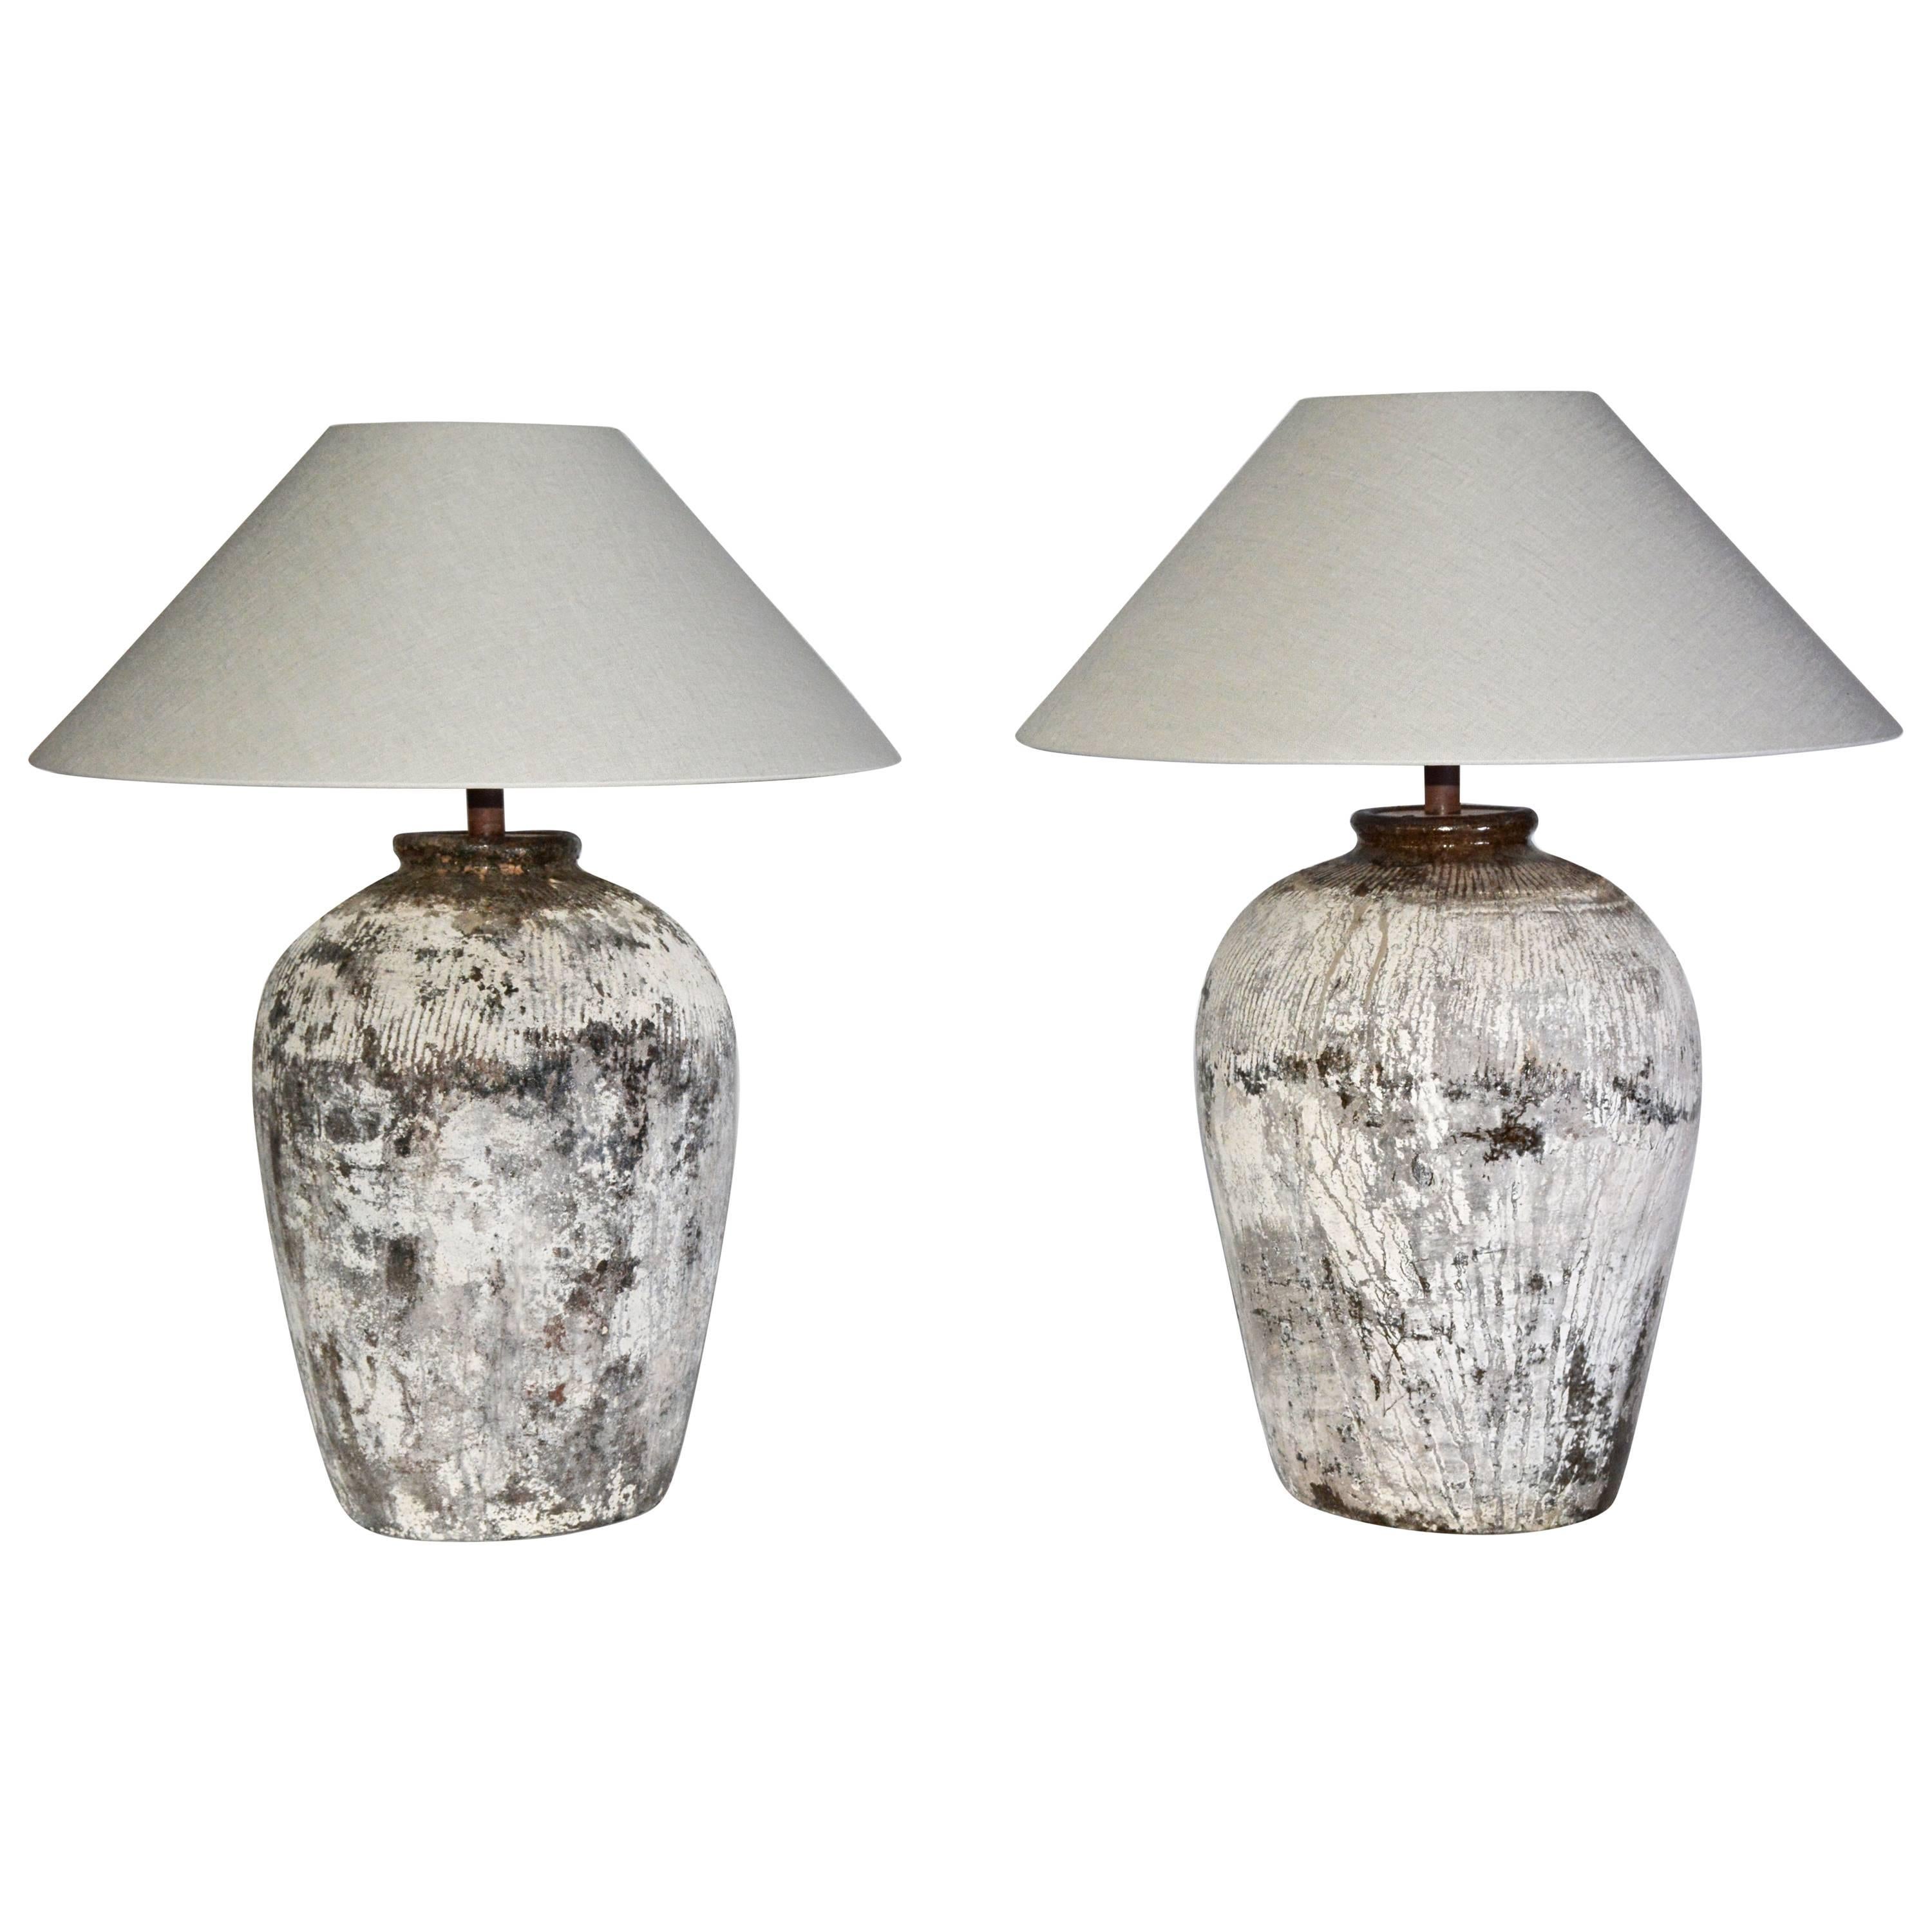 Large Rustic Chinese Wine Jar Lamps with Shades, Pair